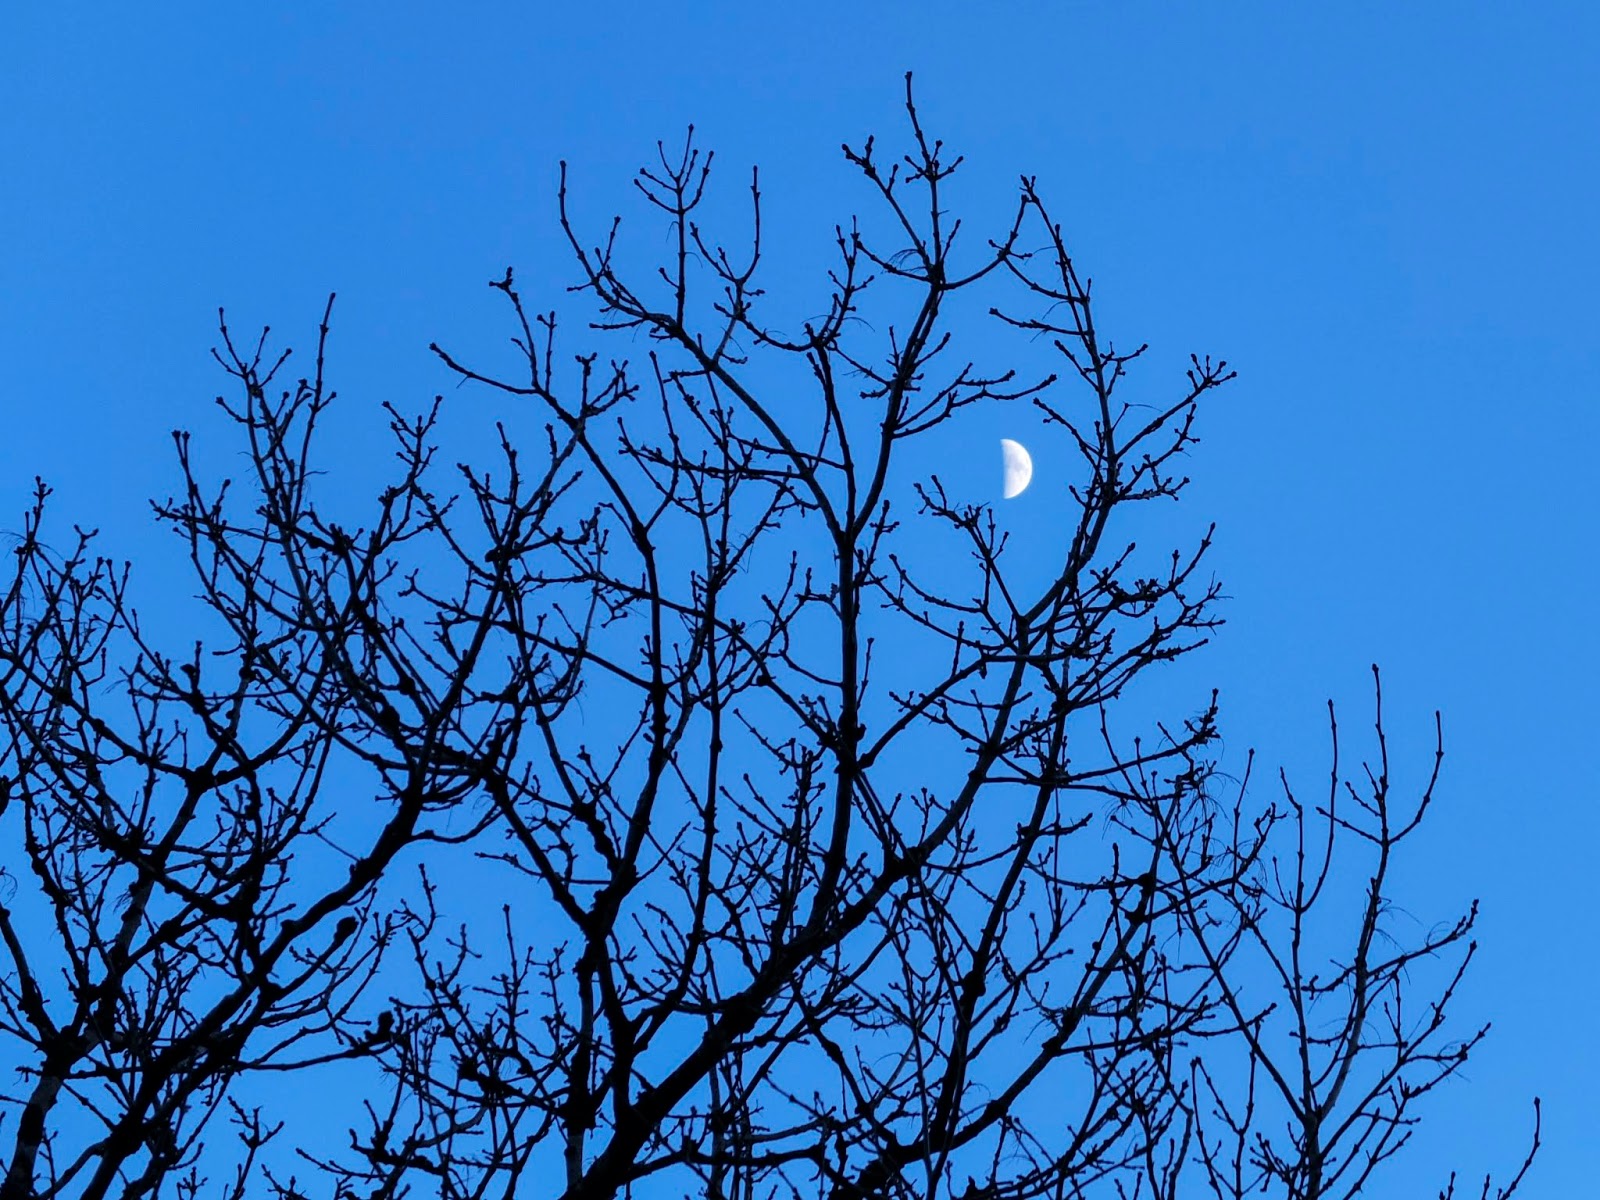 Moon crescent in a bare branch tree.